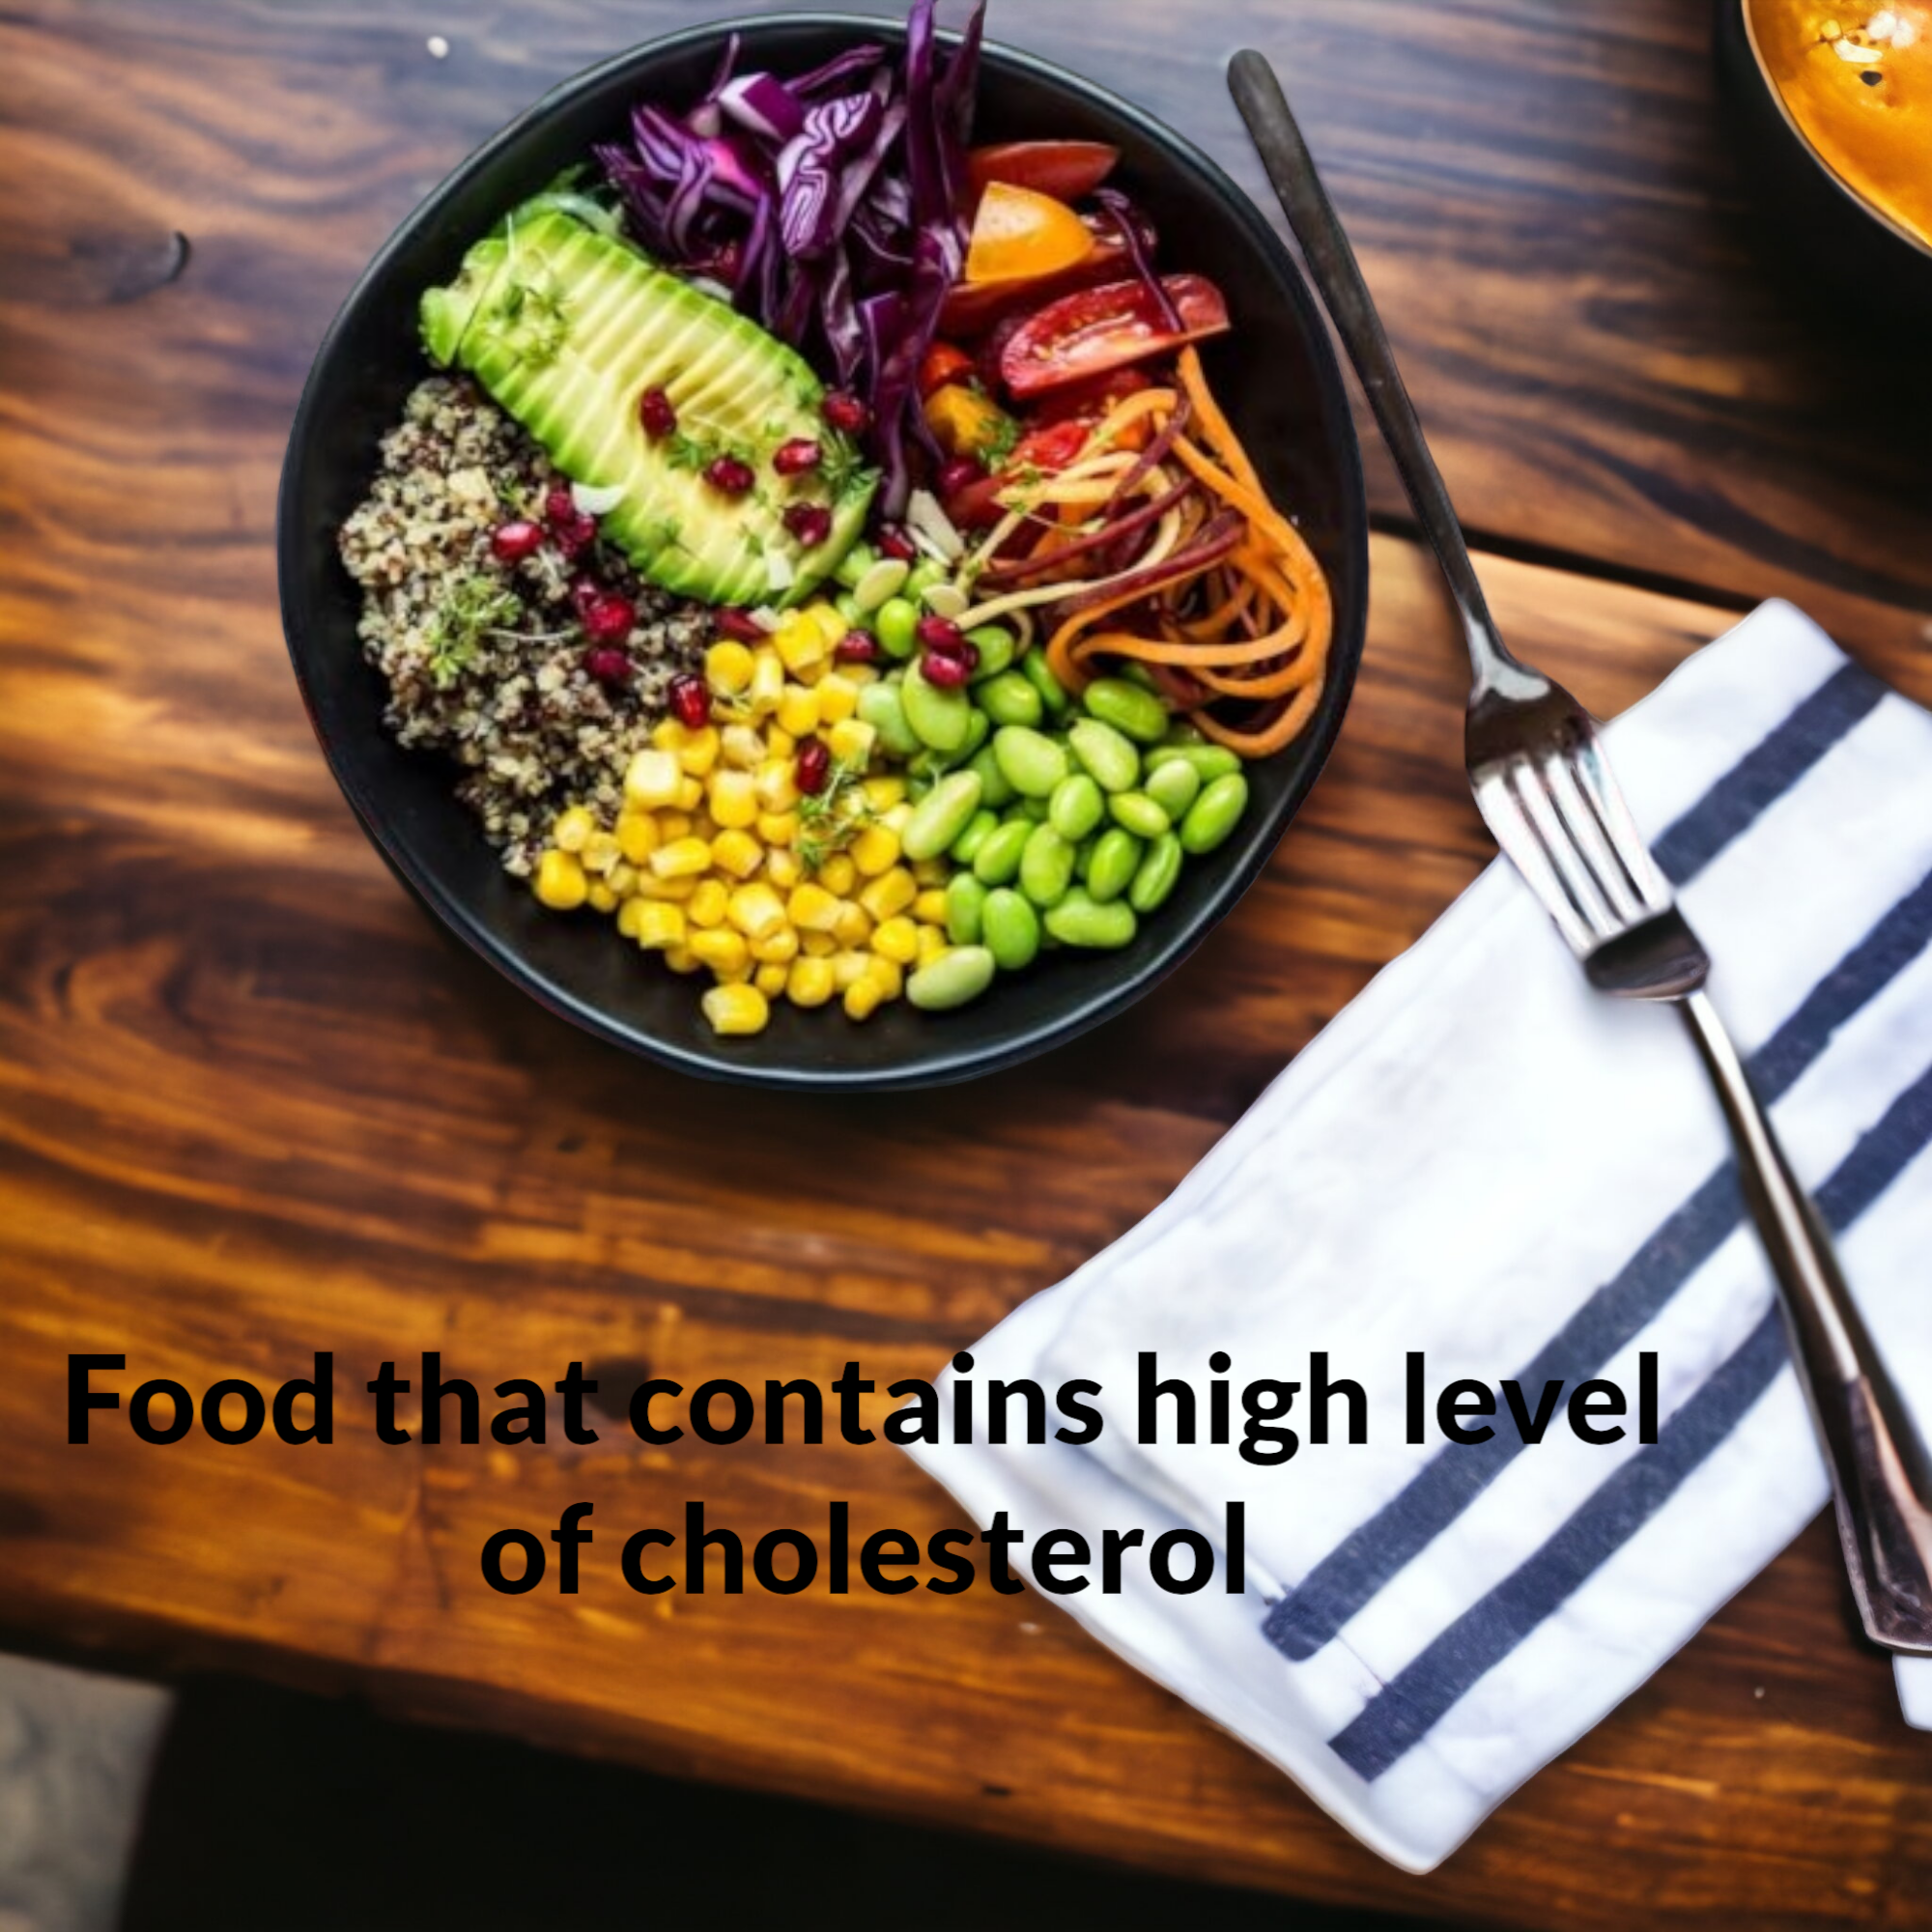 Food that contains high level of cholesterol